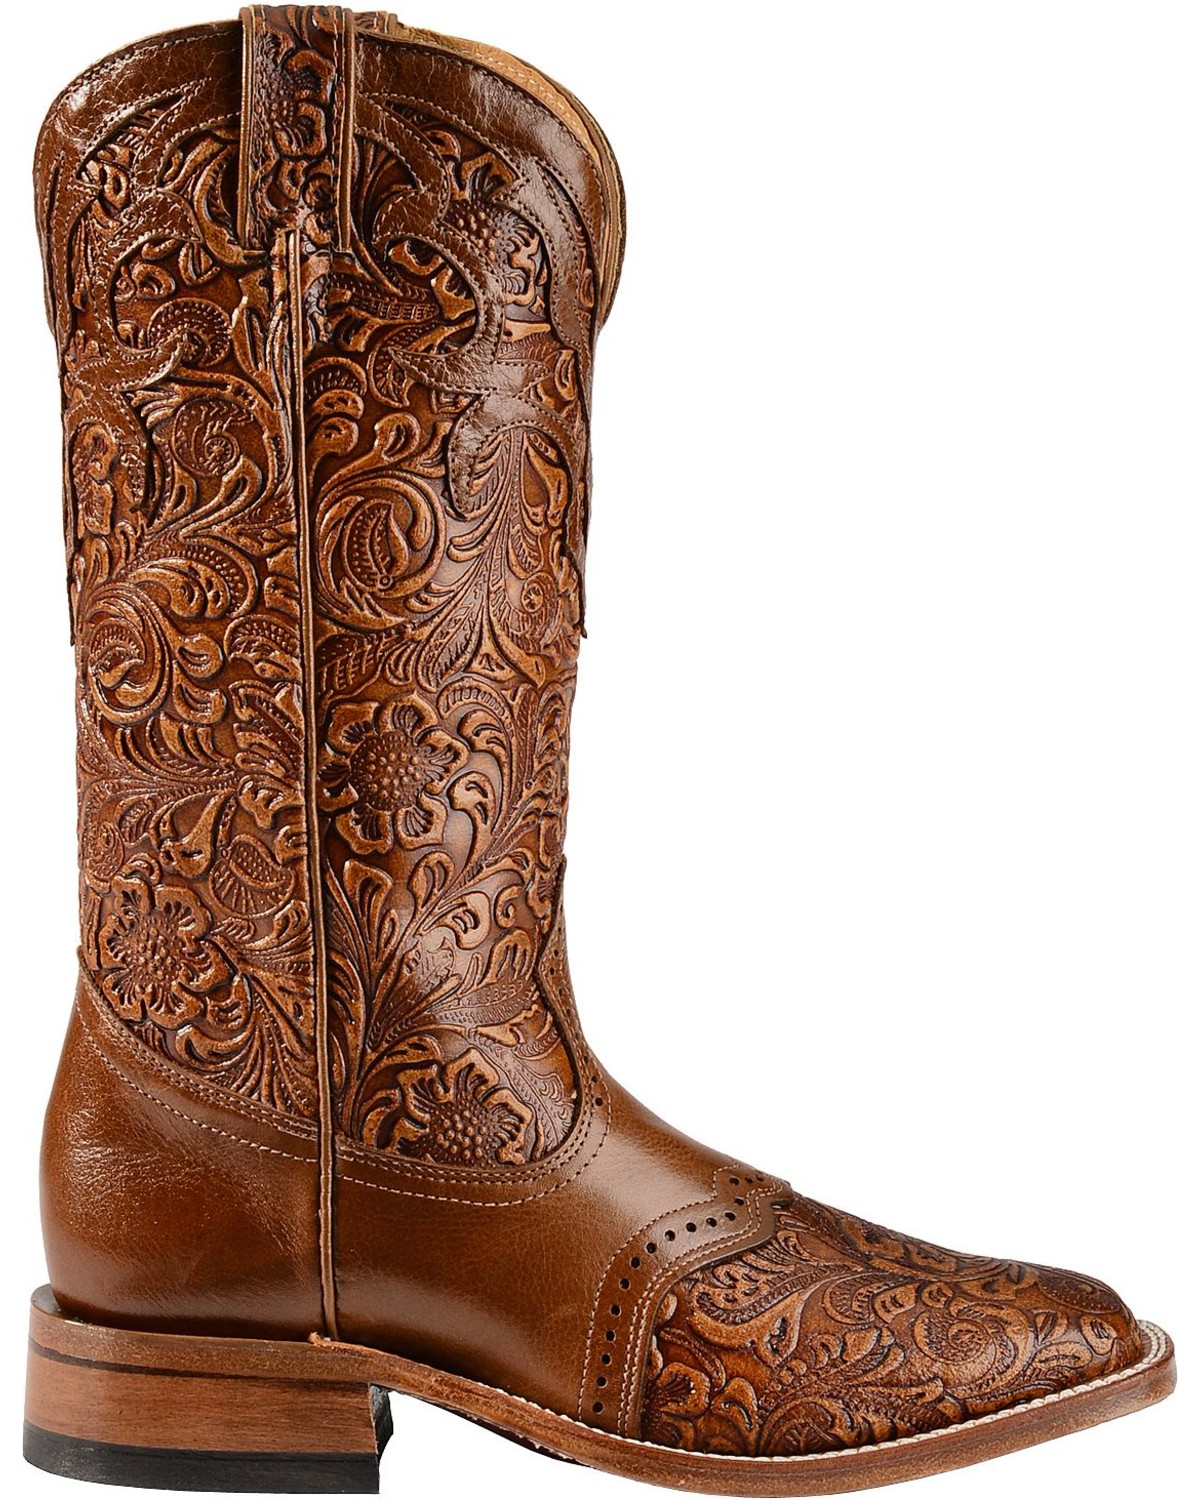 Boulet Hand Tooled Belmont Cowgirl Boots - Square Toe, , hi-res